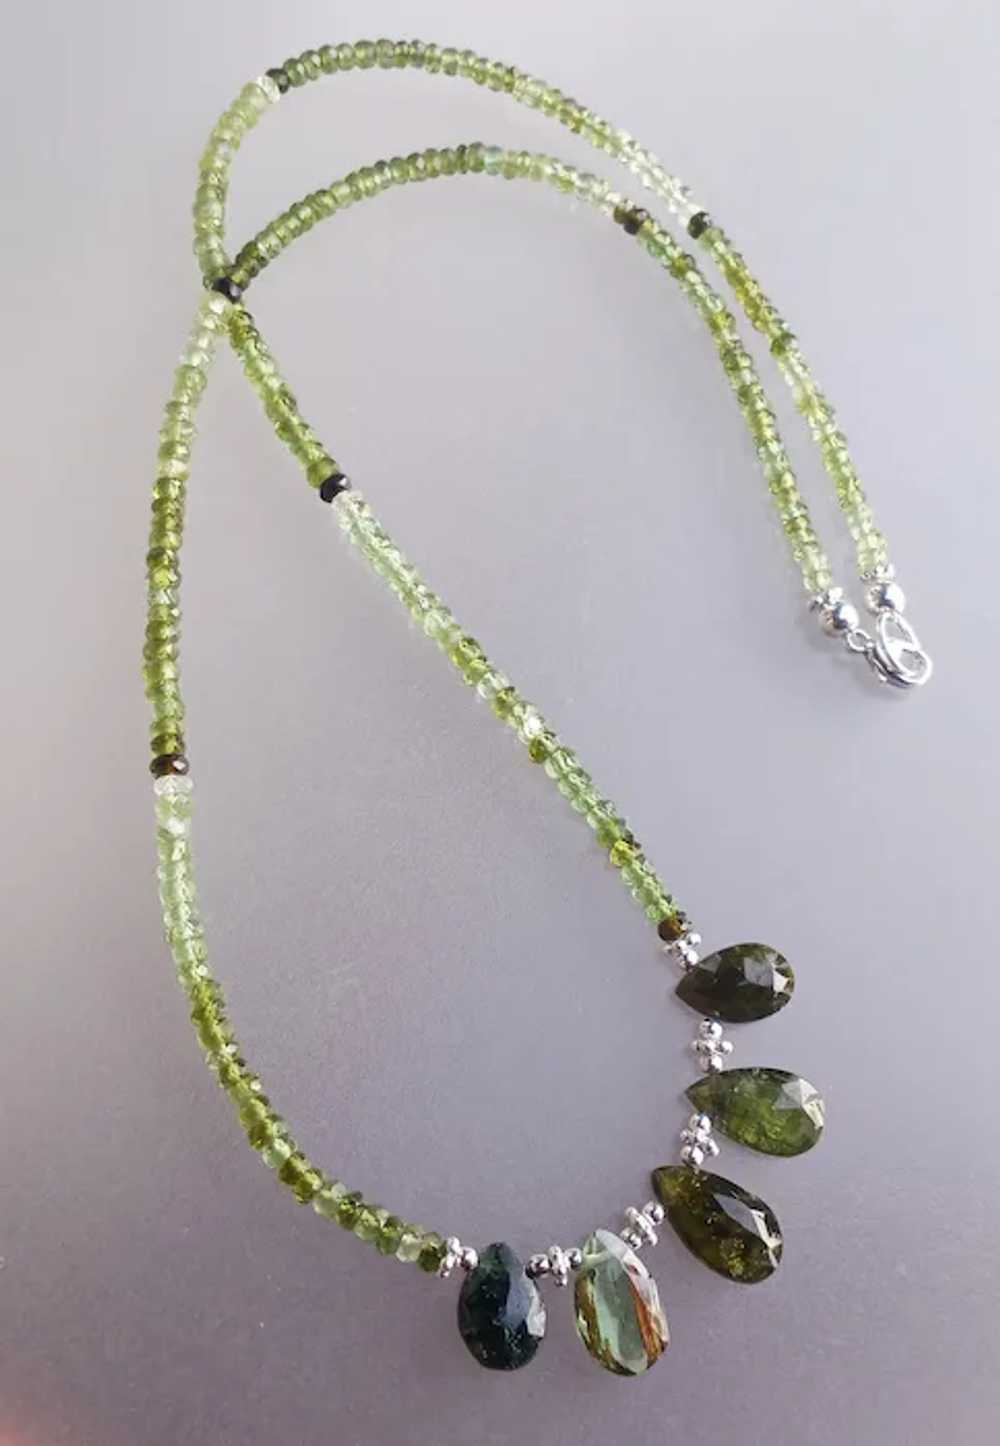 Vivid Green and Black Tourmaline Necklace - image 3